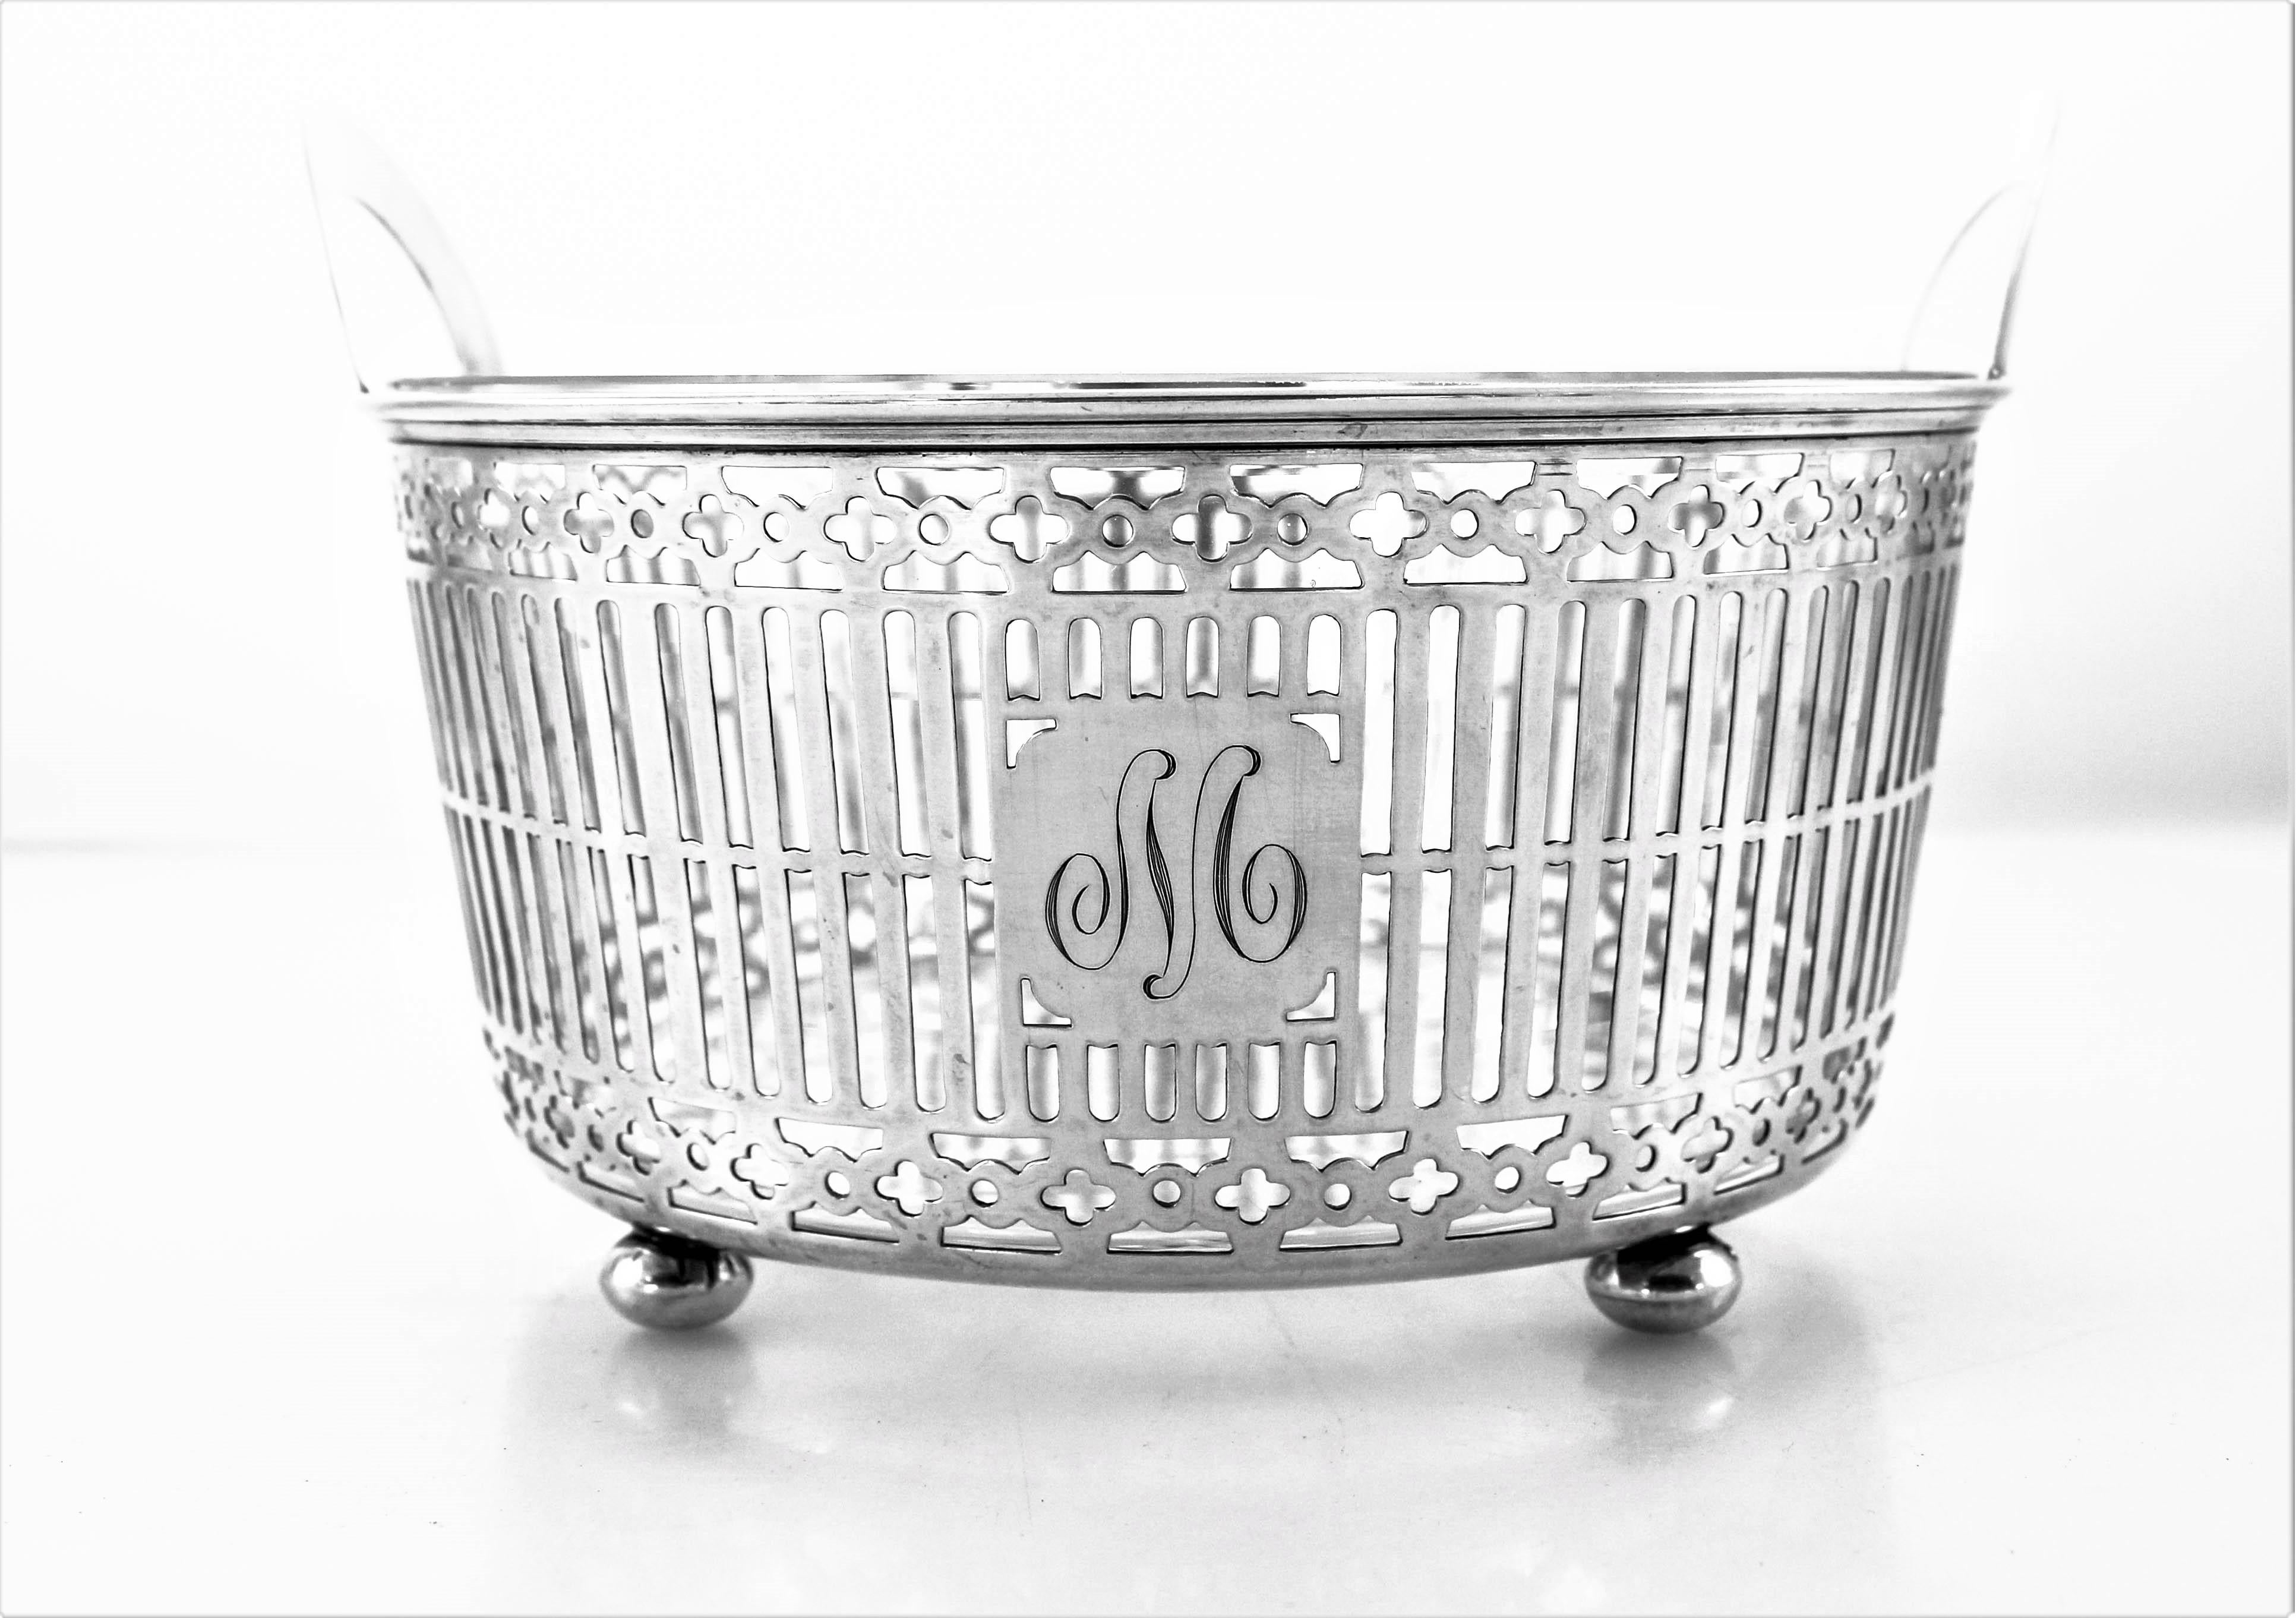 This sterling silver ice bucket has a lattice pattern going around the entire circumference. On each end there is a semi-circular handle to hold and pass it around. It stands on four ball-feet that props it off the surface. The crystal liner comes